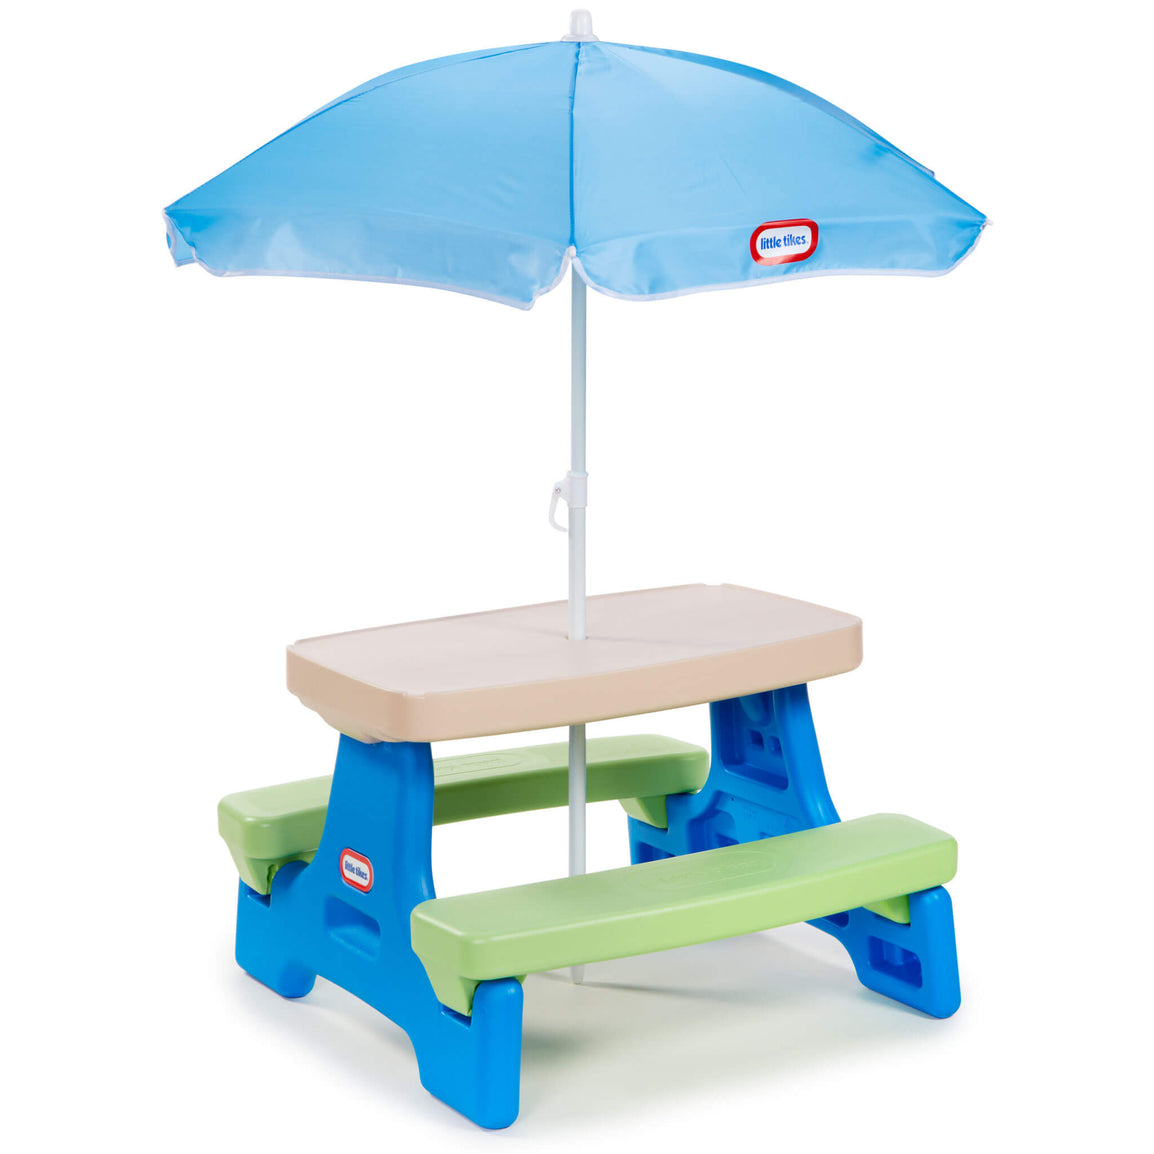 Easy Store™ Jr. Play Table with Umbrella - Blue\Green - Official Little Tikes Website